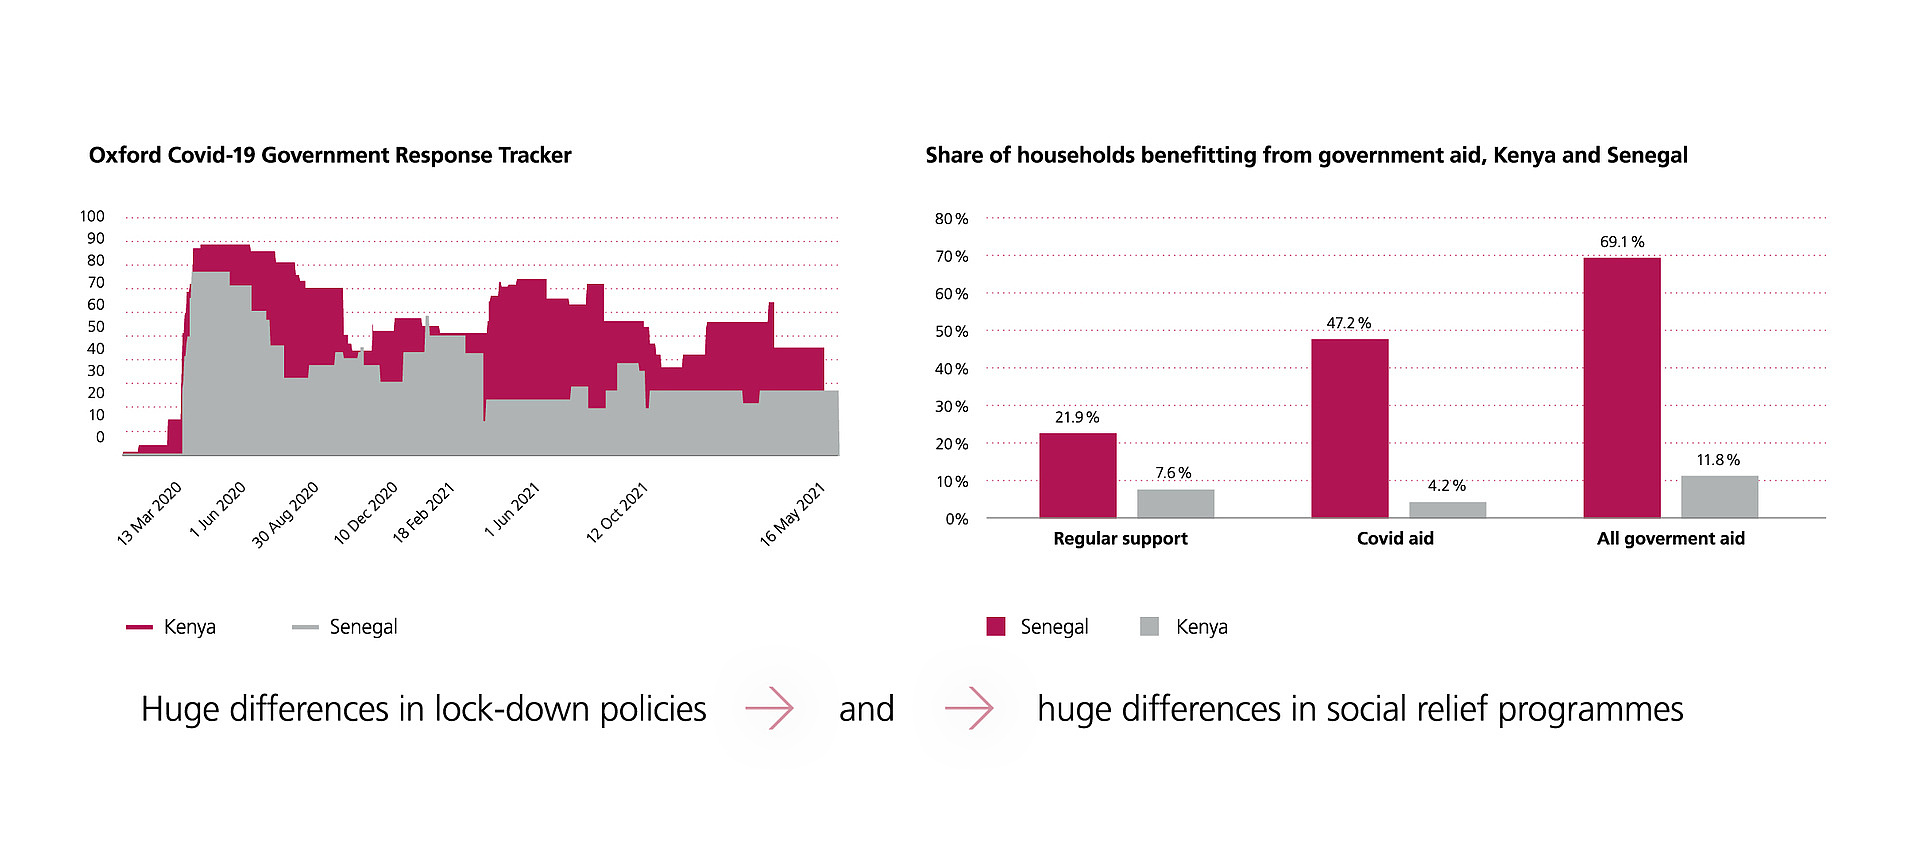 Traub Einzelgrafiken "Oxford Covid-19 Government Response Tracker", "Share of households benefitting from government aid, Kenya and Senegal."